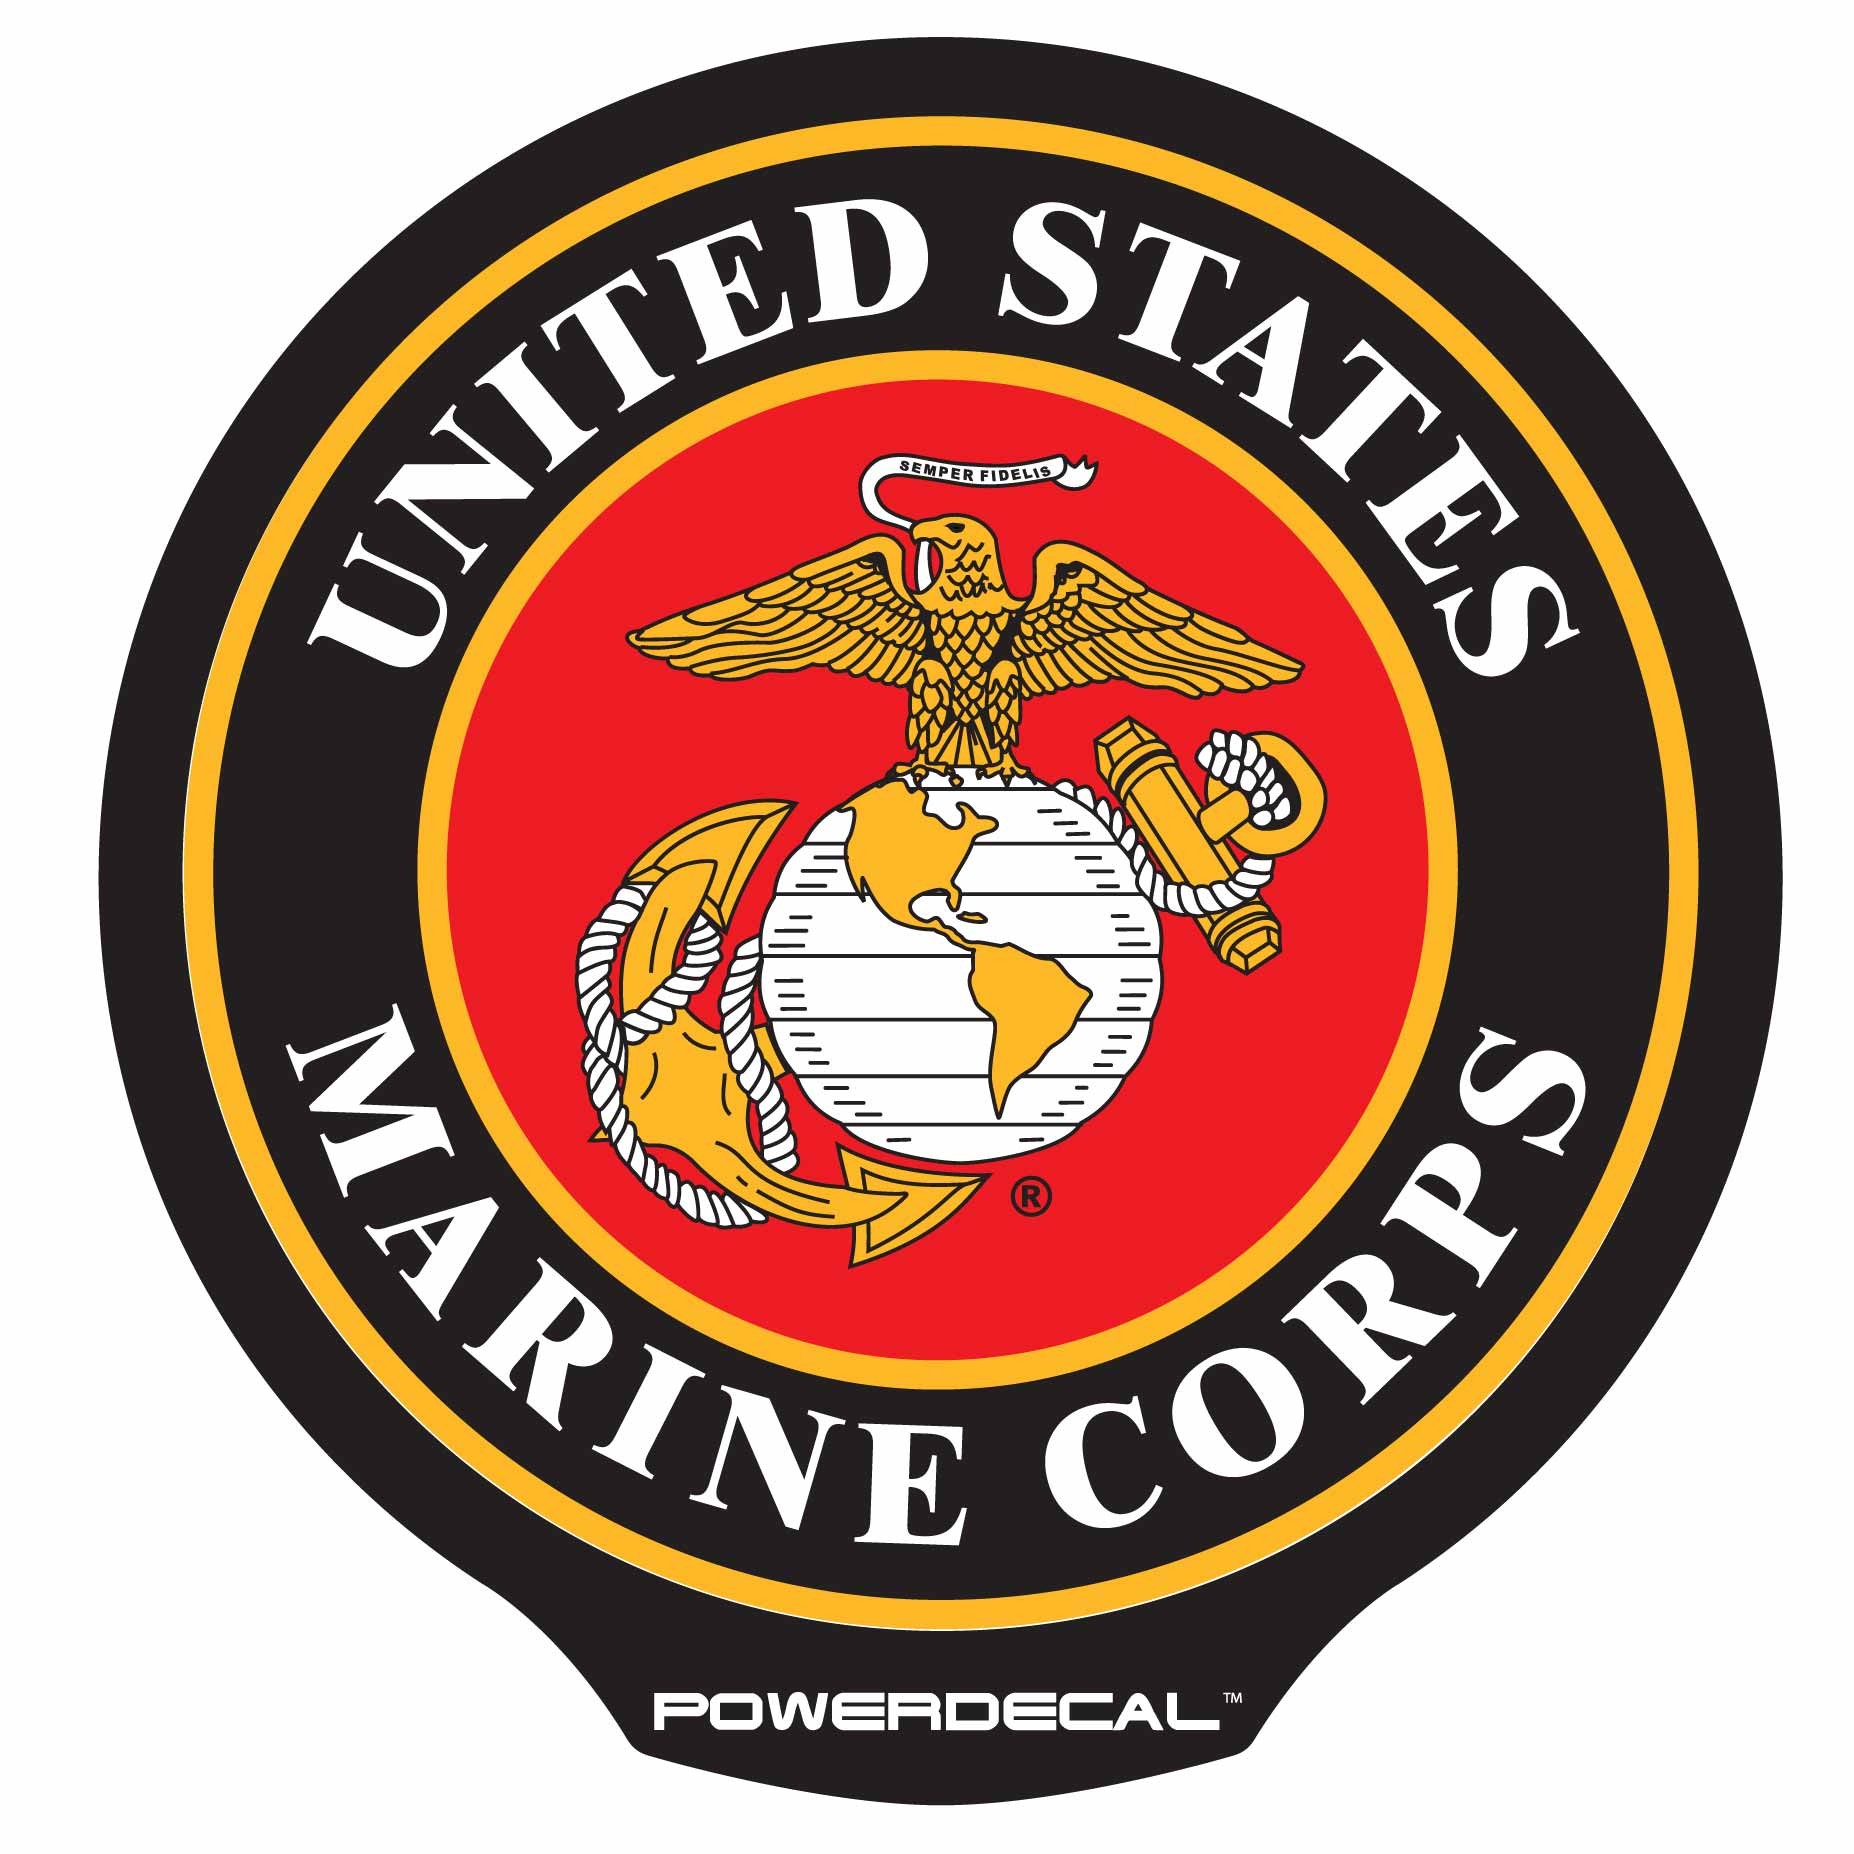 Marine Corps Logo Pictures   Clipart Best